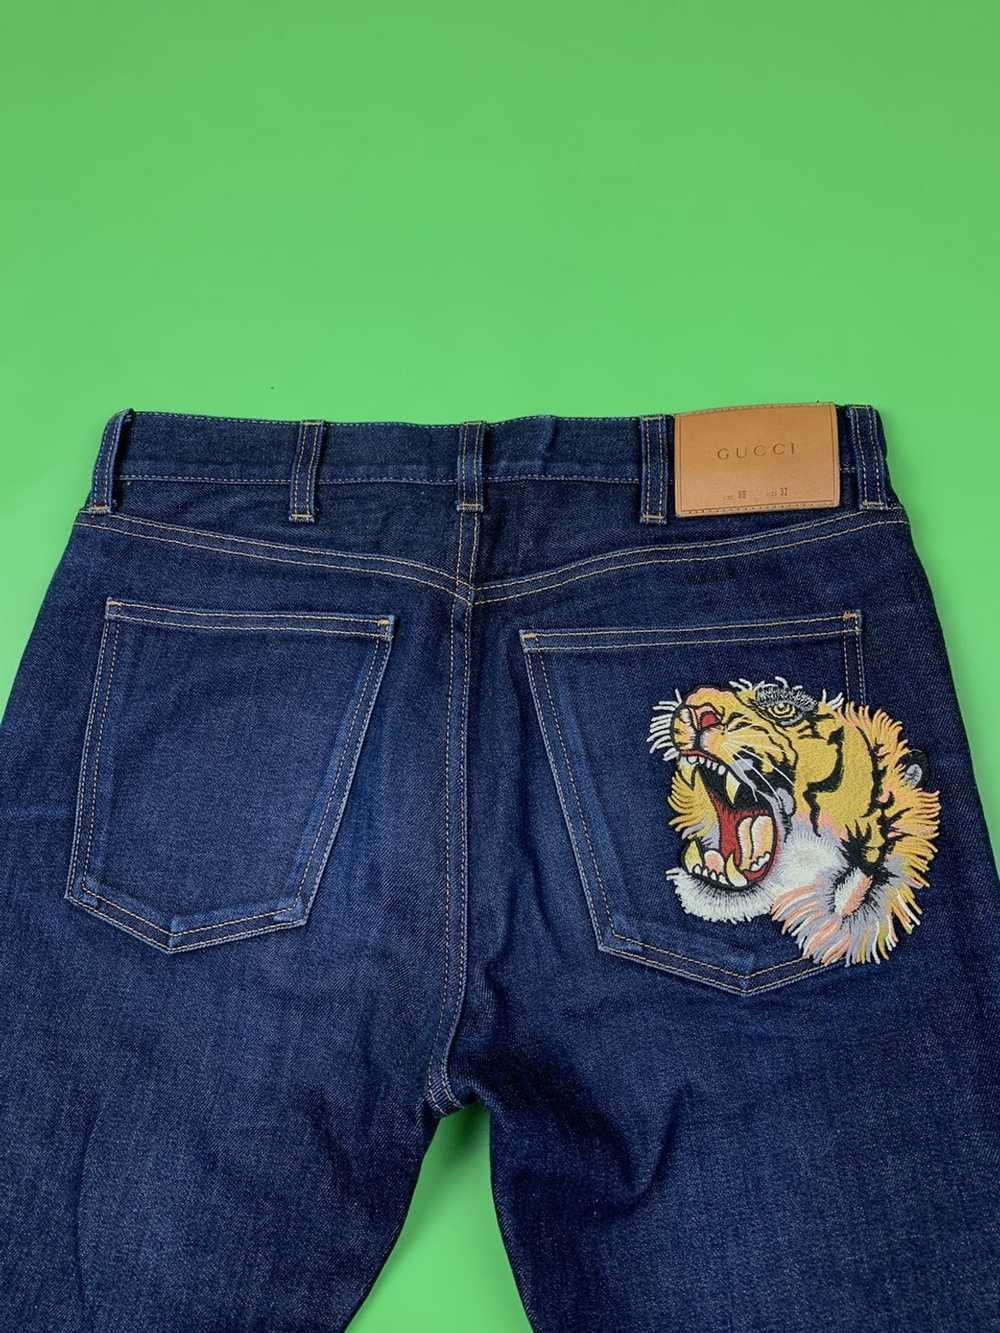 Gucci Gucci Tiger Embroidered Denim Pants - image 2